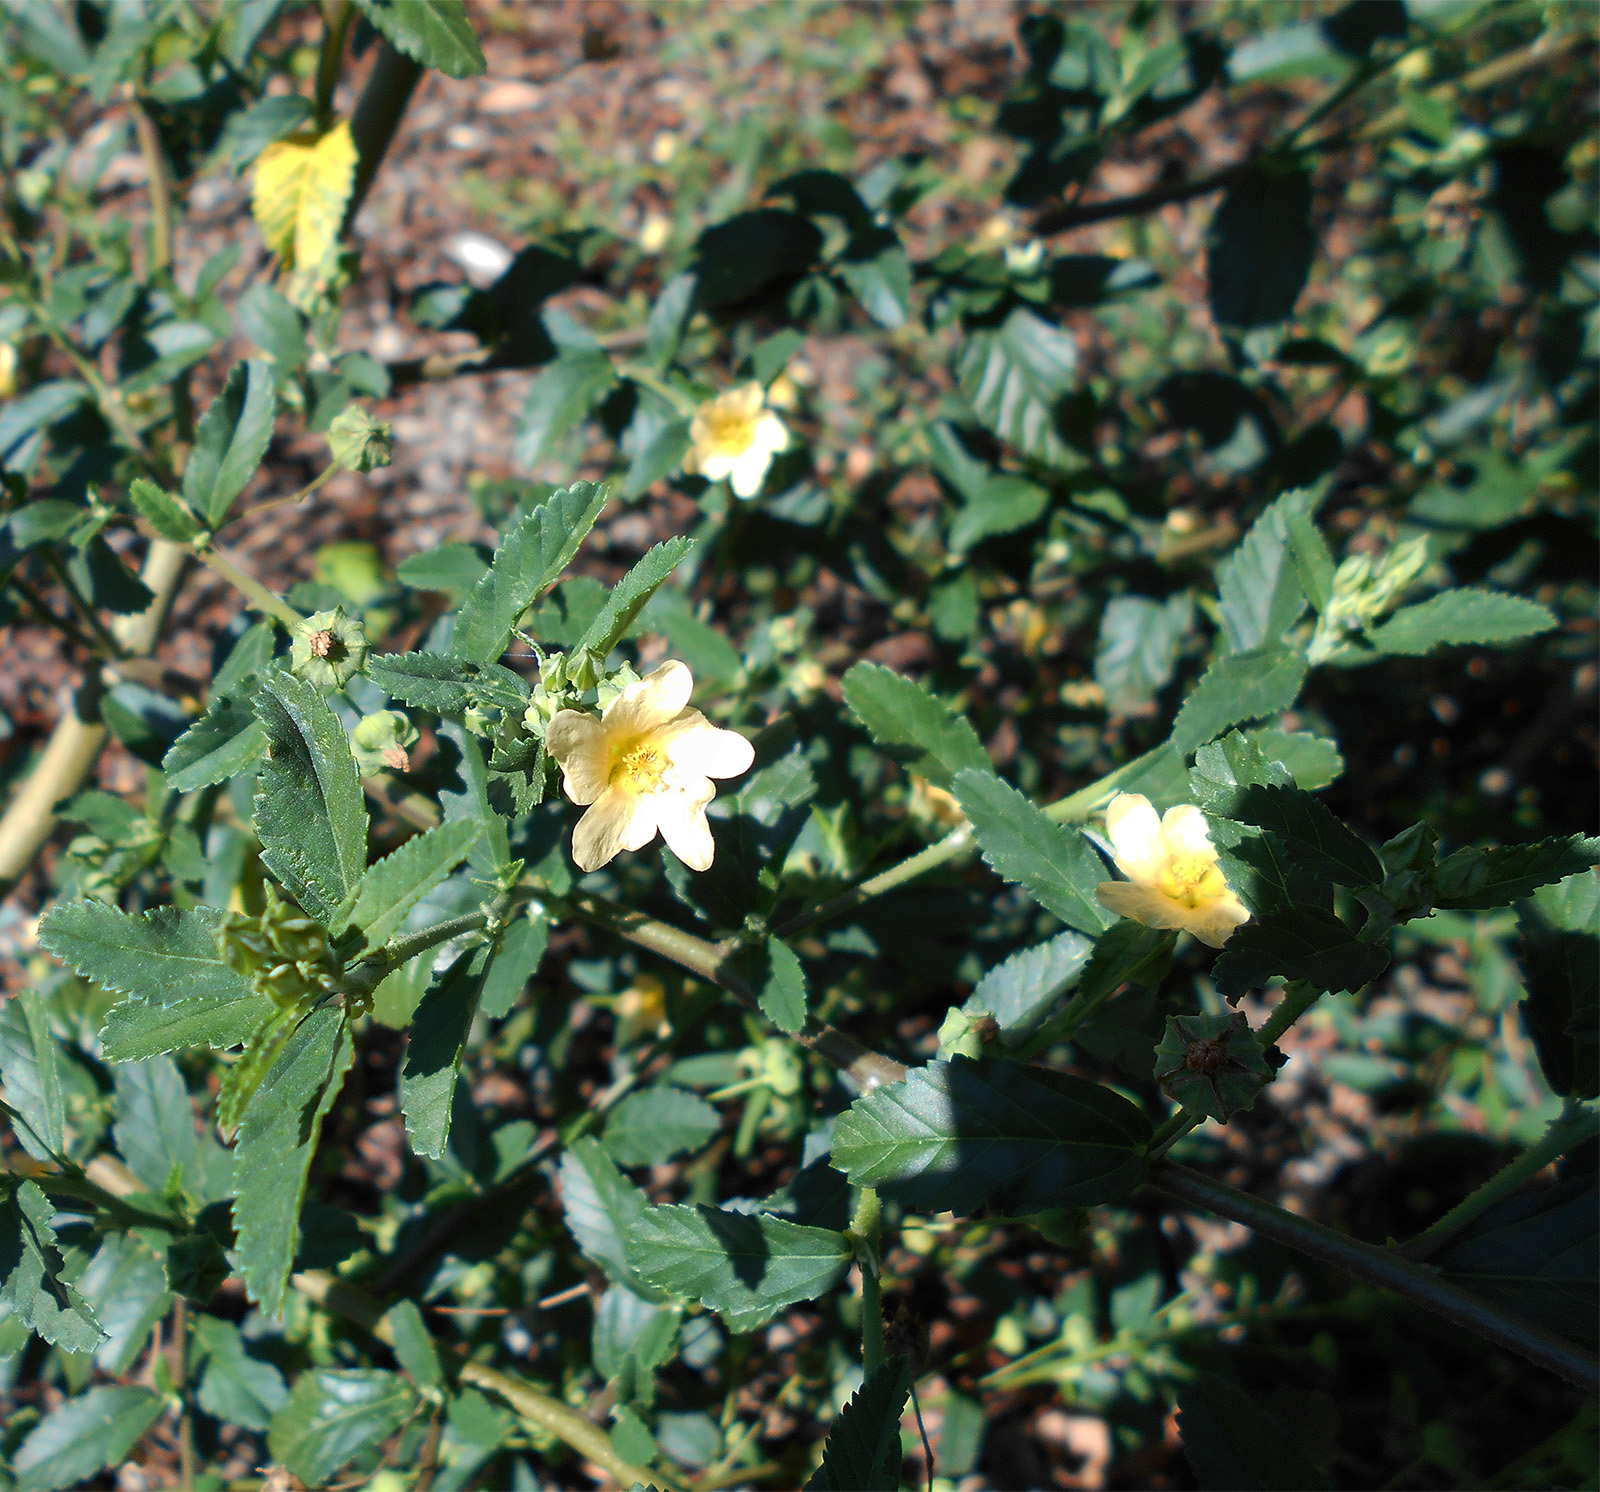 Sida acuta bed, differences in growth